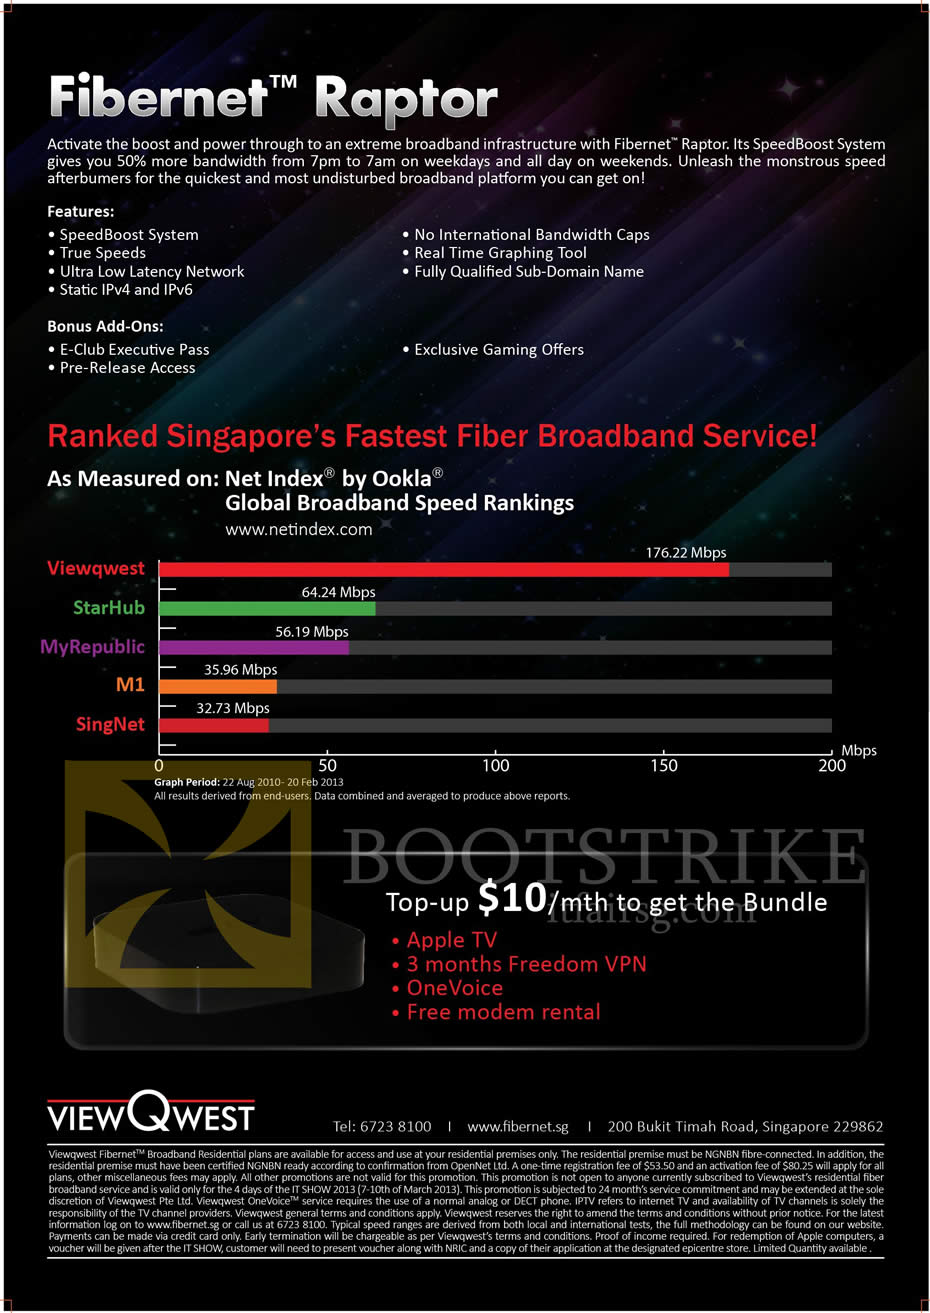 IT SHOW 2013 price list image brochure of Viewqwest Fibre Broadband Fibernet Raptor Apple TV, Freedom VPN, OneVoice, Features, Rankings, Net Index By Ookla